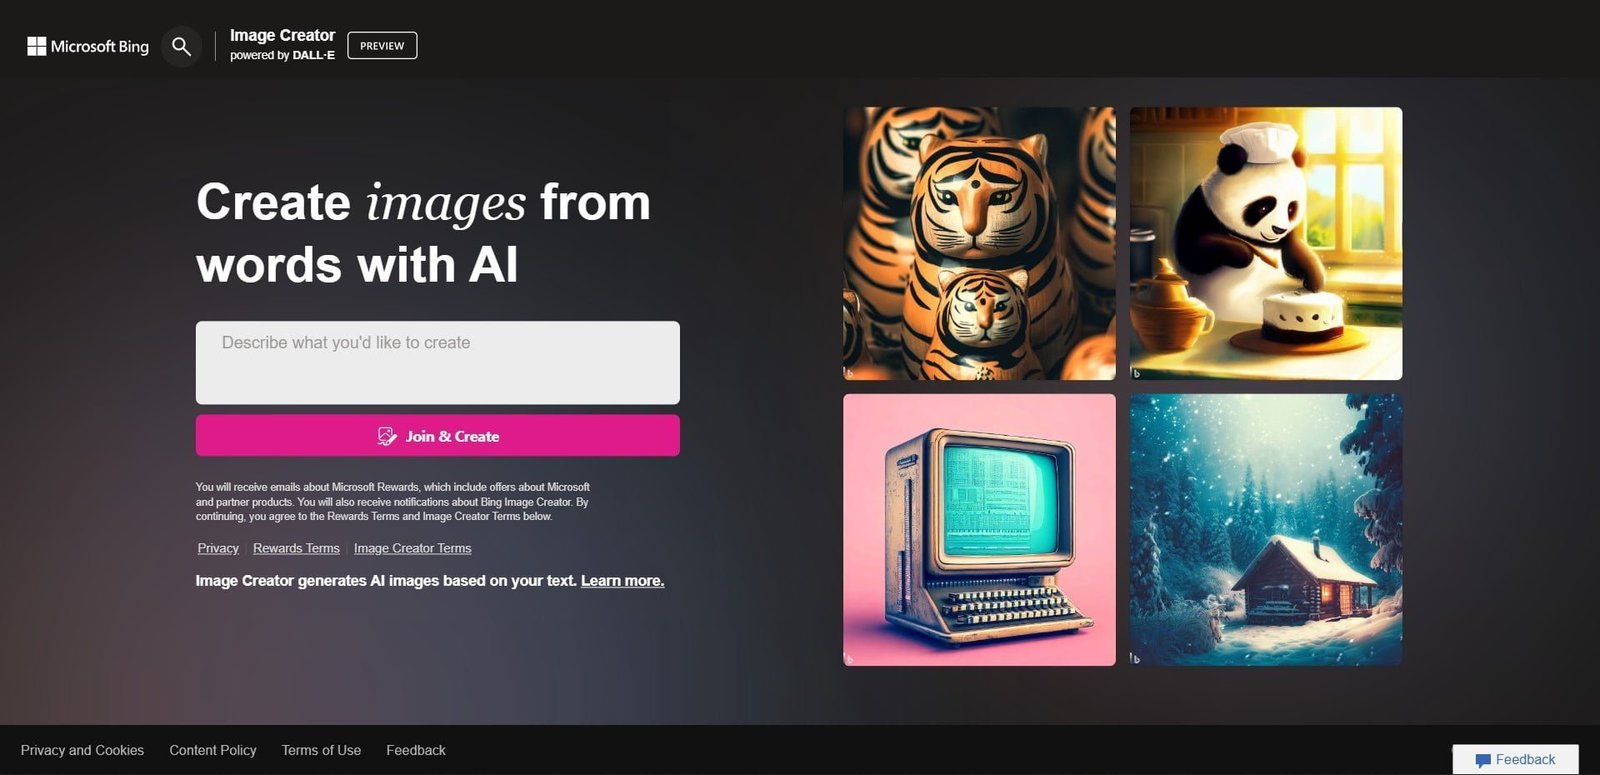 Bing AI is an AI image generator tool that allows users to create images from words and text. It can be used for generating images for marketing